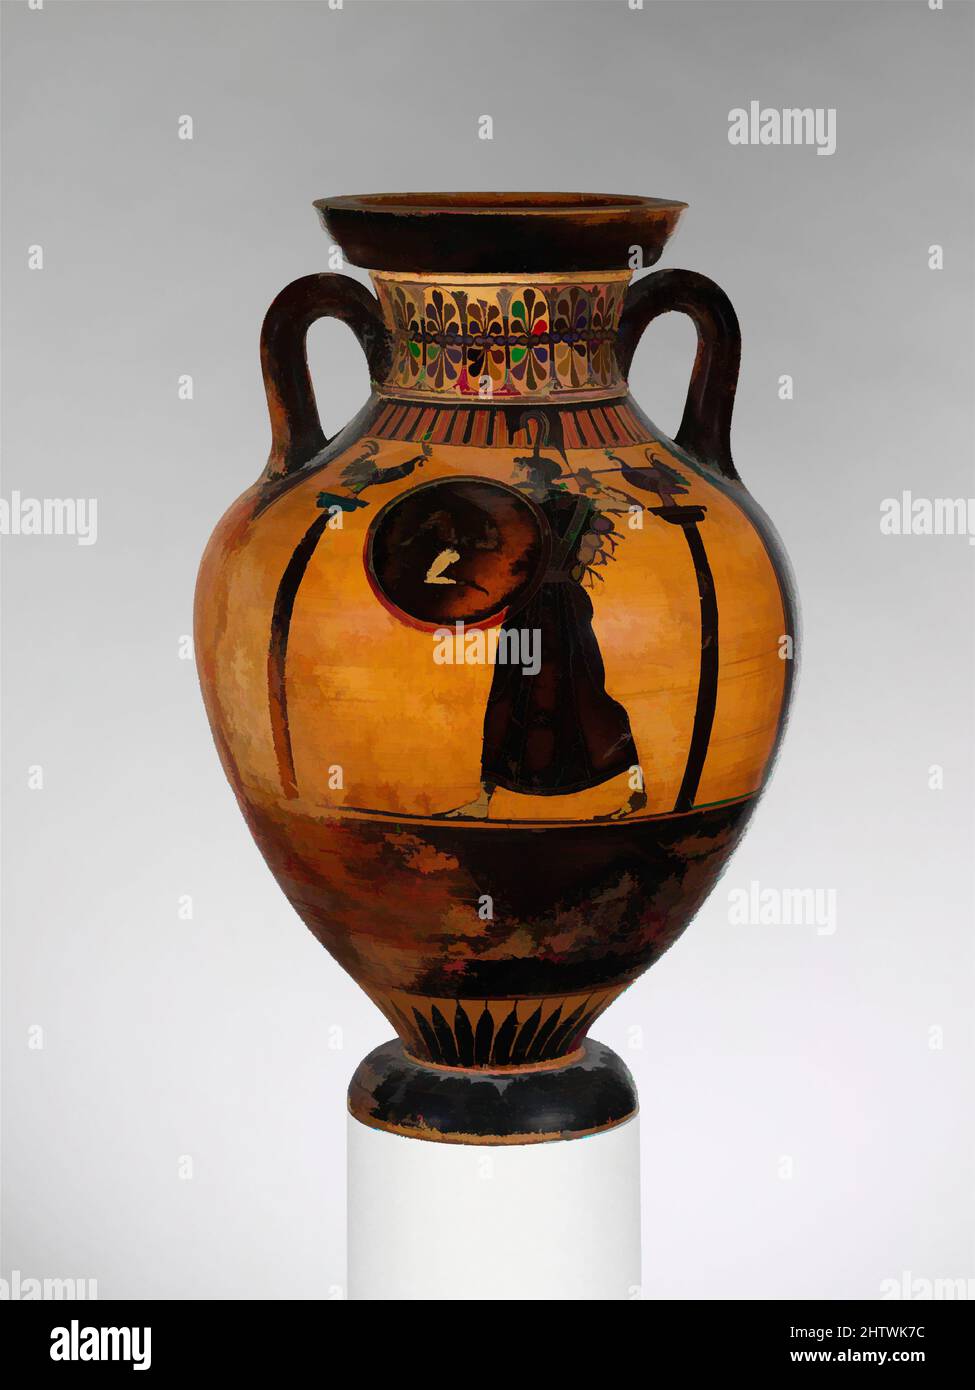 Art inspired by Terracotta Panathenaic prize amphora, Archaic, ca. 510 B.C., Greek, Attic, Terracotta; black-figure, H. 18 15/16 in. (48.2 cm), Vases, Obverse, Athena Reverse, chariot This amphora is different from the typical prize vase. It does not have the inscription identifying it, Classic works modernized by Artotop with a splash of modernity. Shapes, color and value, eye-catching visual impact on art. Emotions through freedom of artworks in a contemporary way. A timeless message pursuing a wildly creative new direction. Artists turning to the digital medium and creating the Artotop NFT Stock Photo